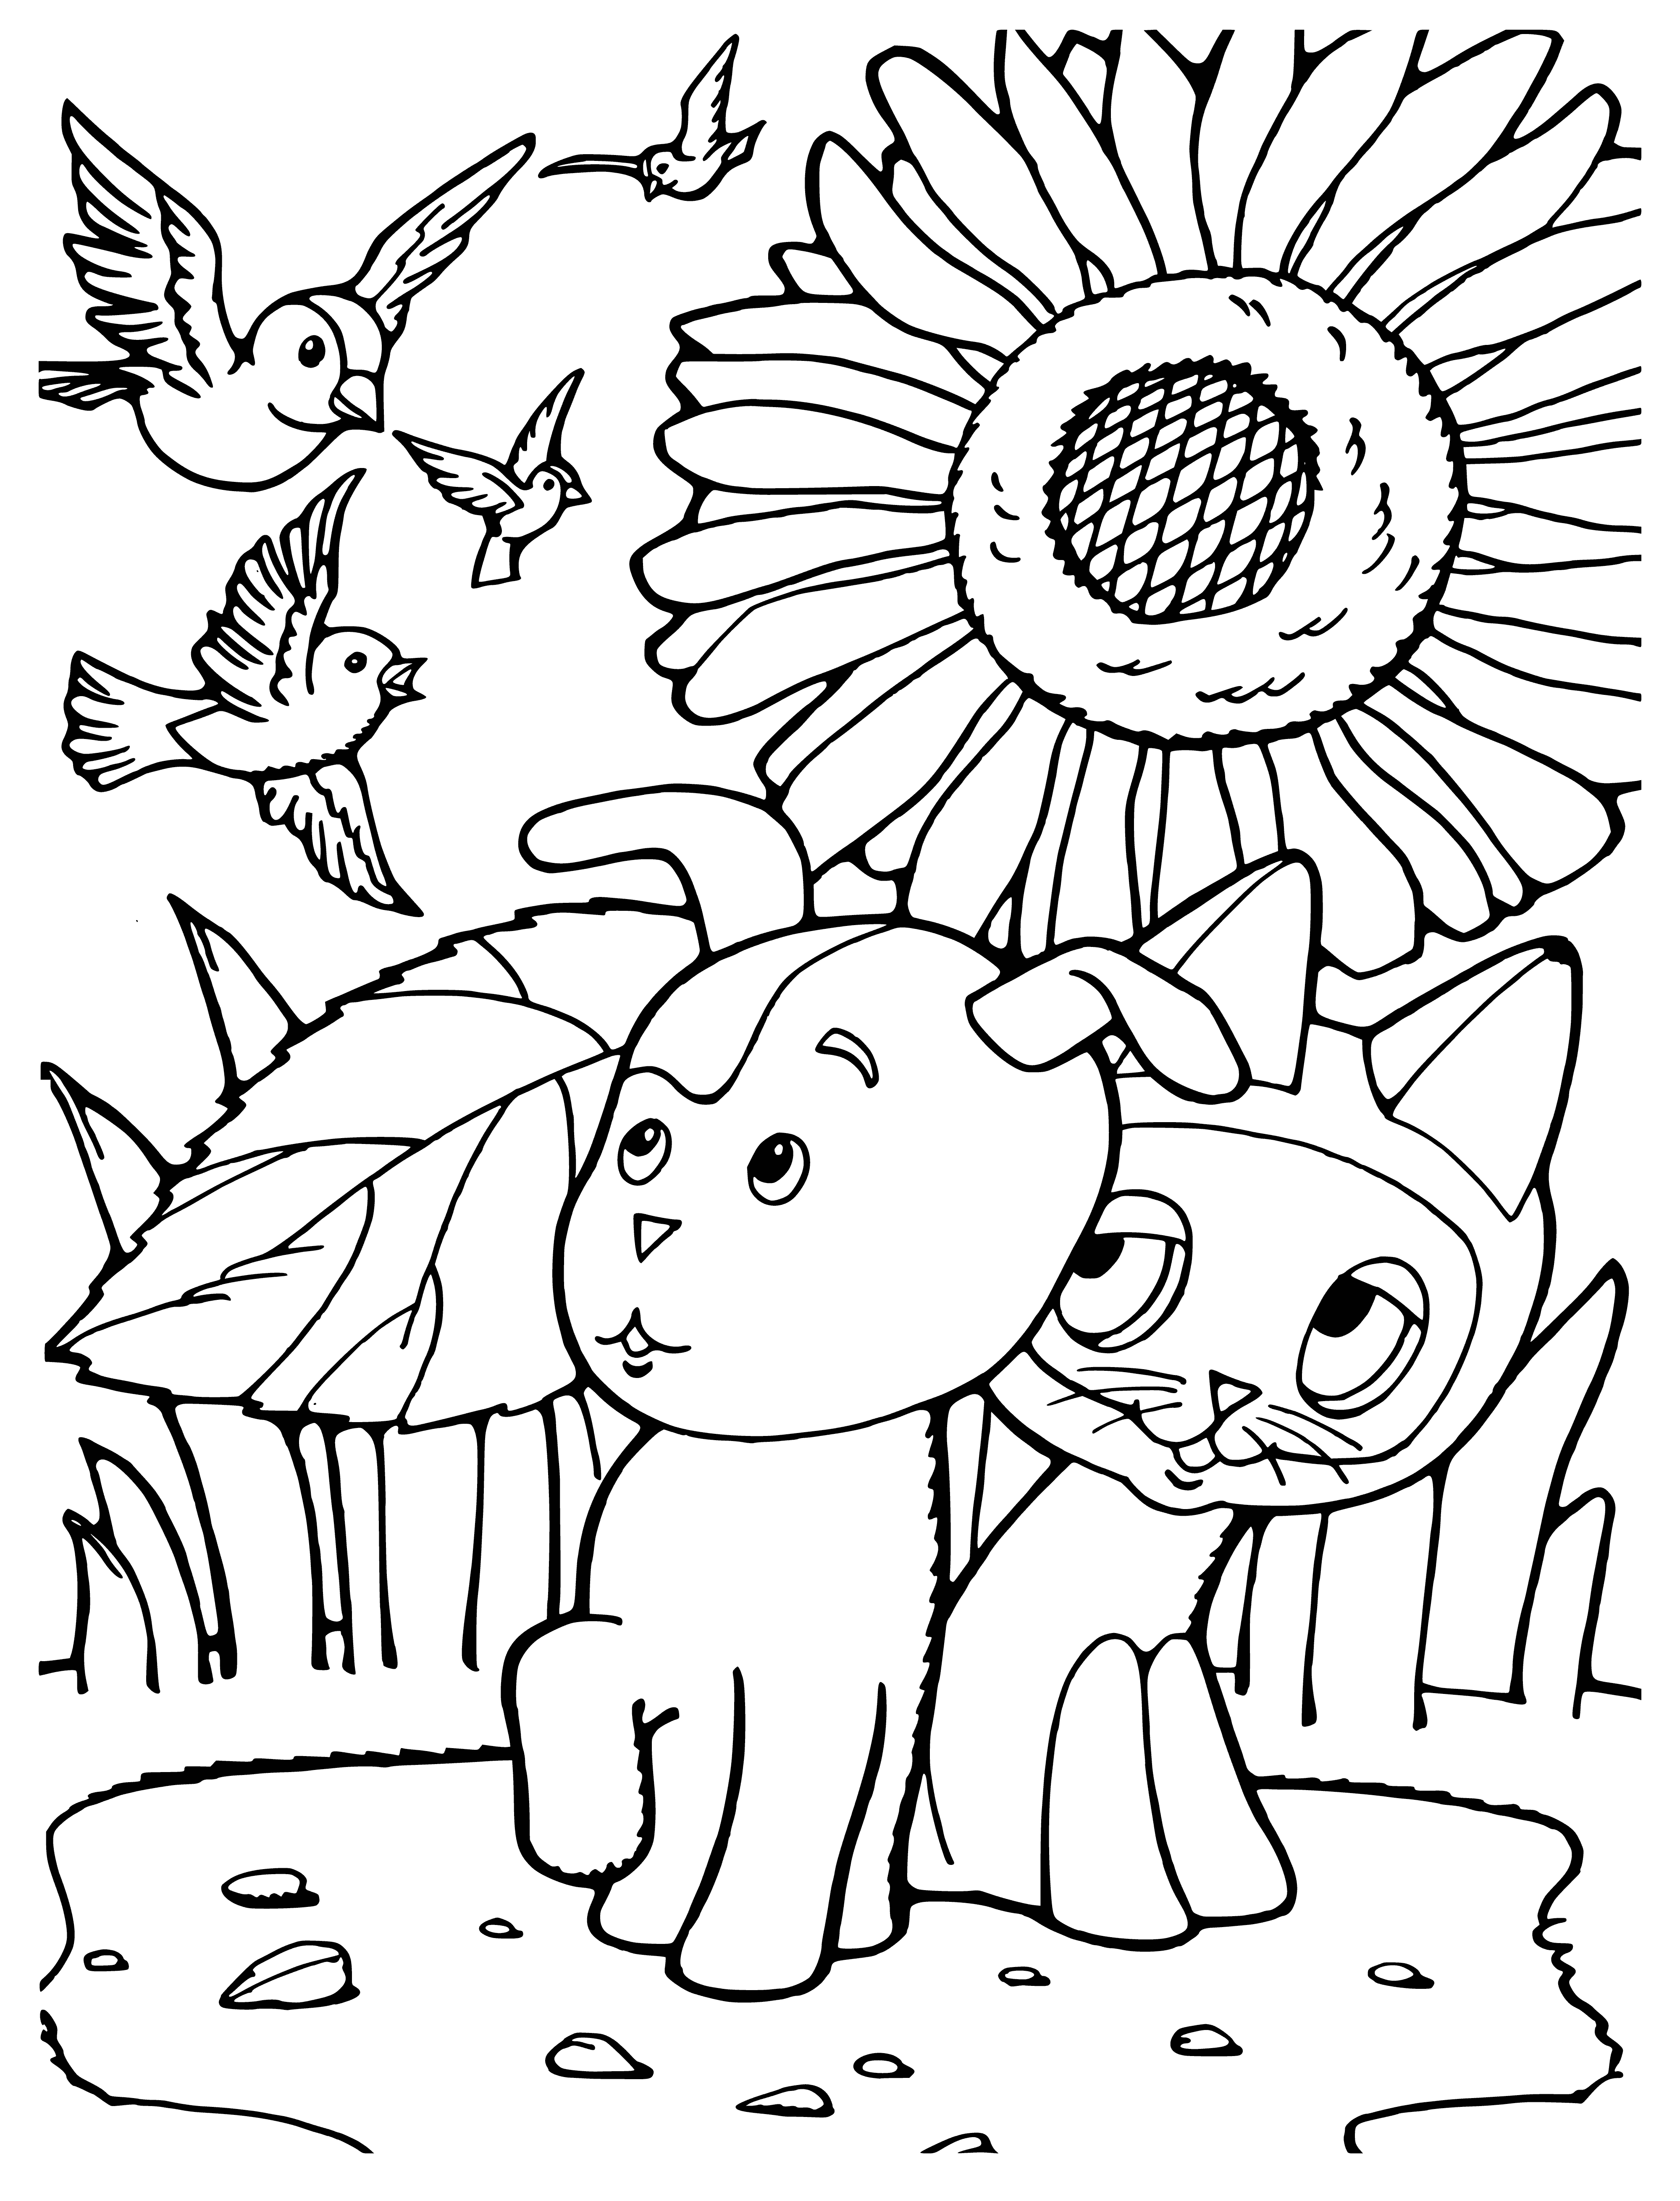 coloring page: Two kittens, one gray and white, one brown and white, sit side-by-side as if sleeping. Coloring page for all ages!